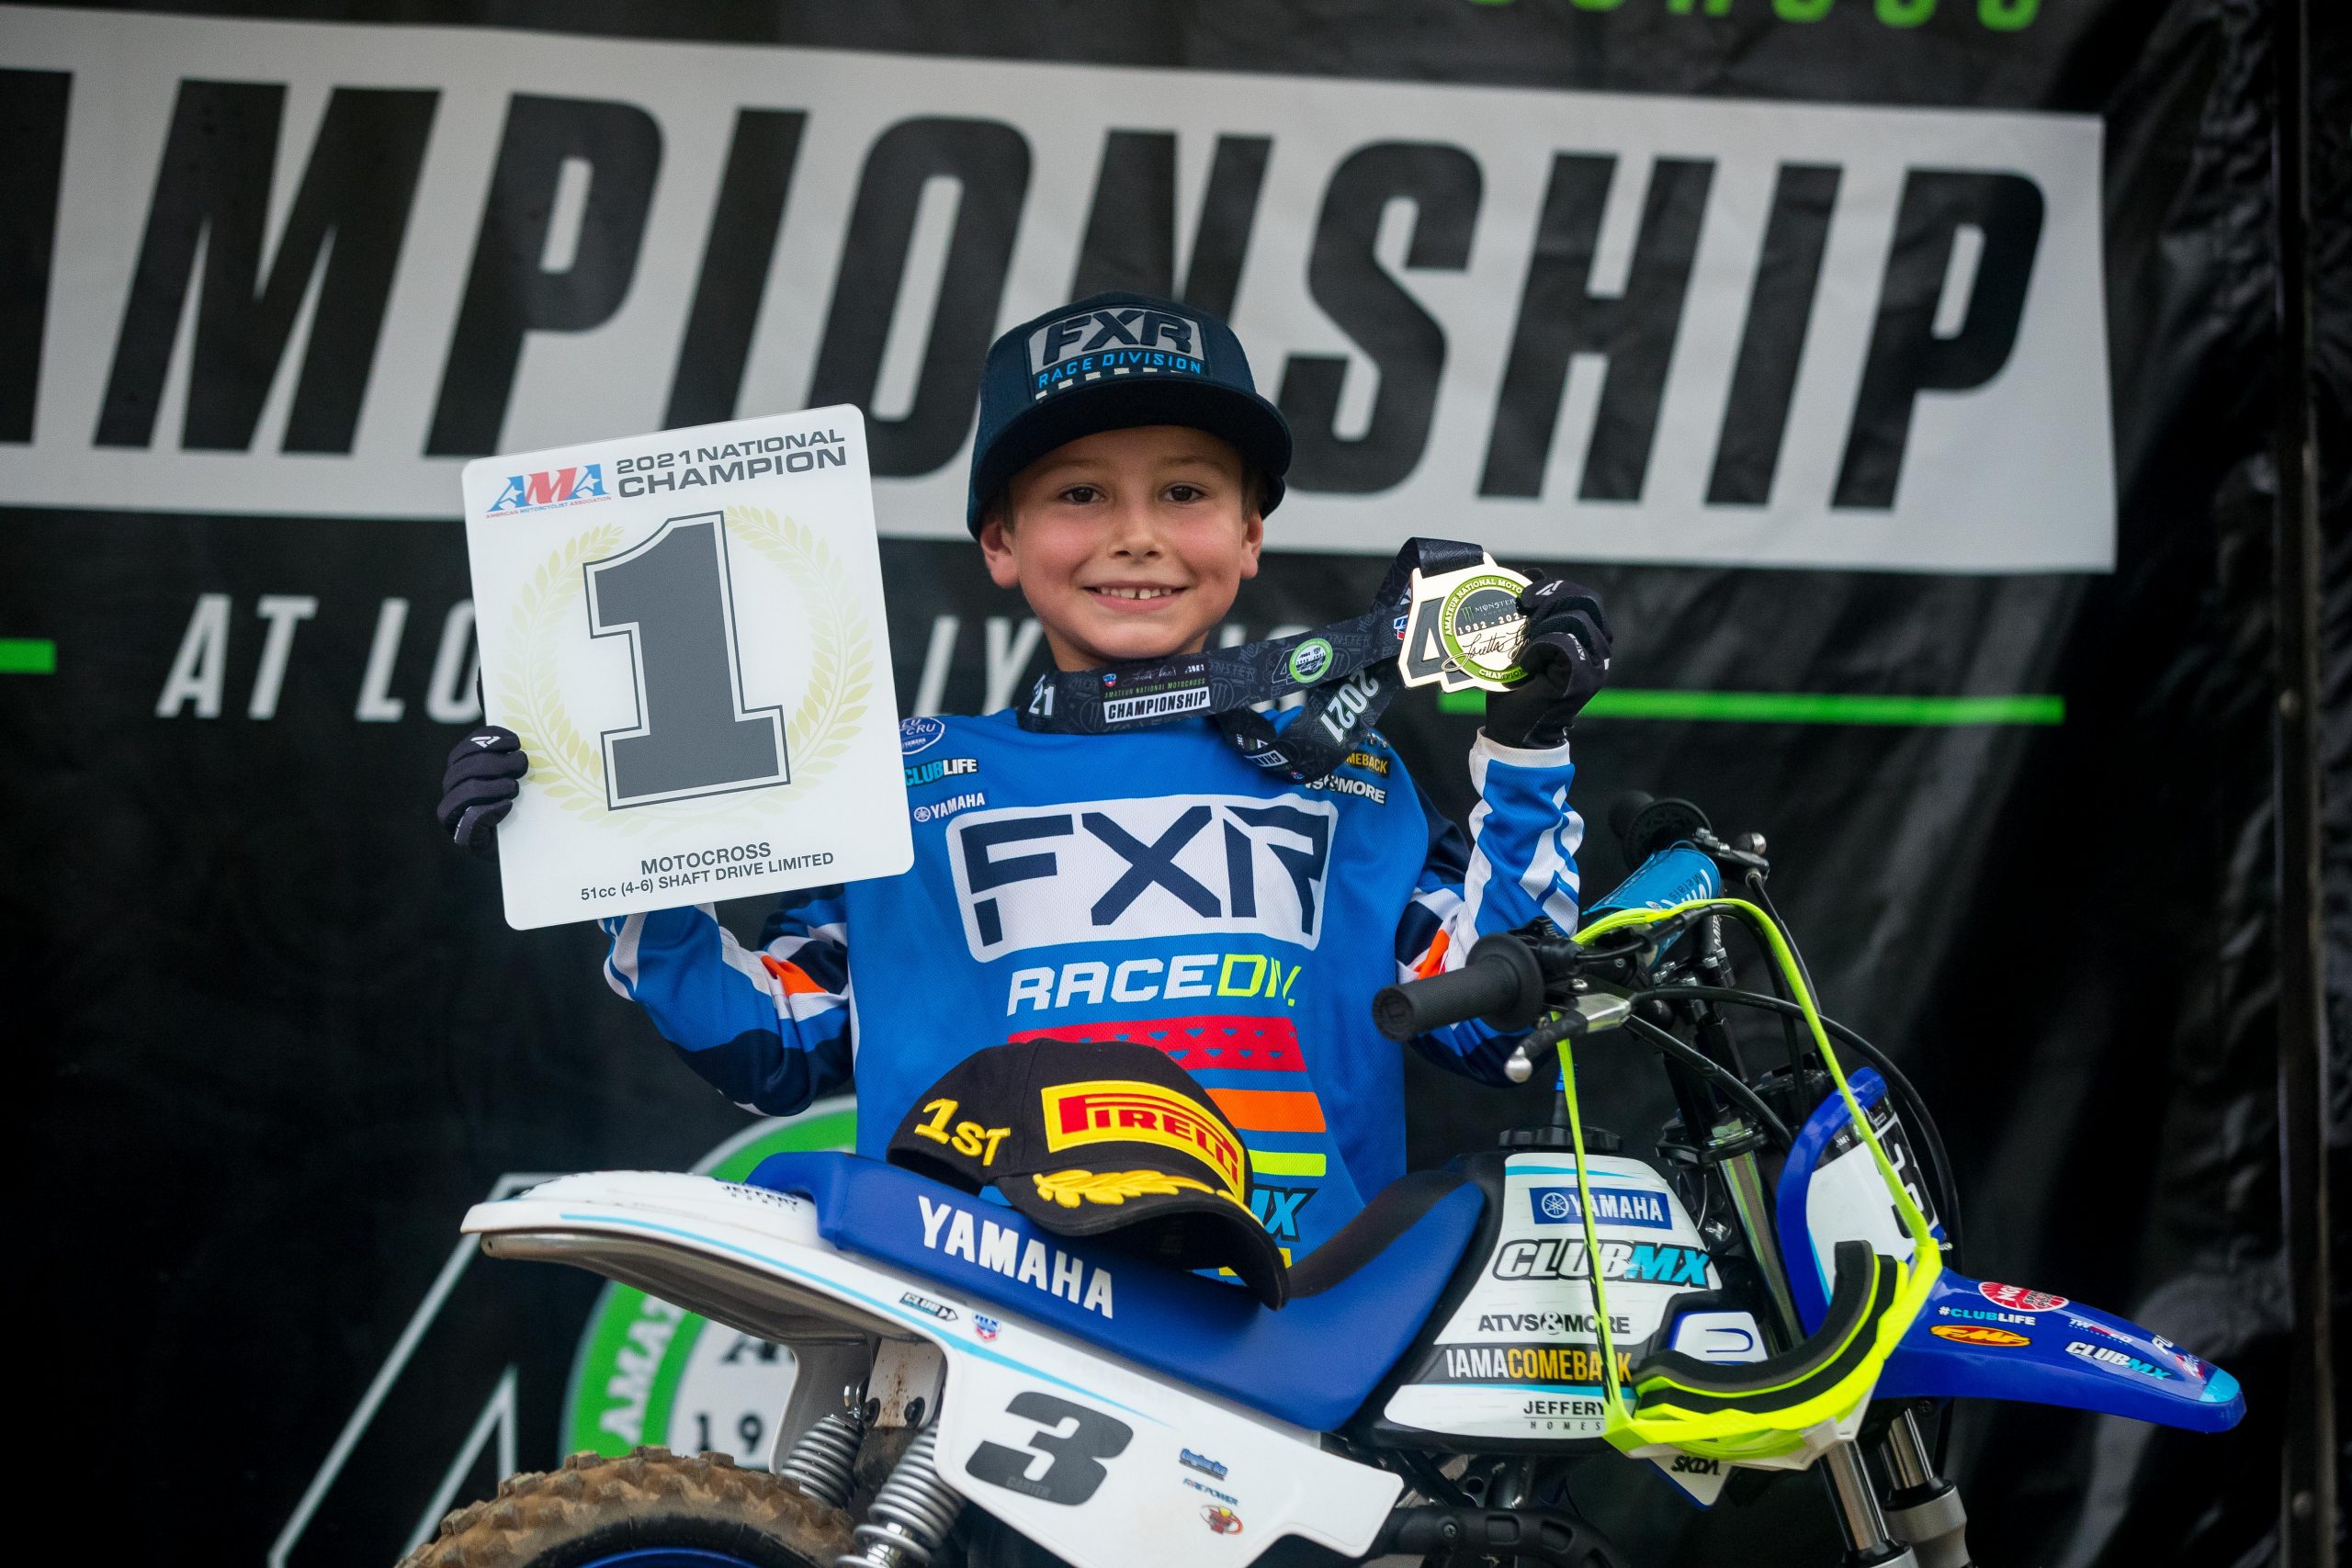 220727 Carter Schutte took his Pirelli tires and PW to an AMA Championship in 2021. | Photo- Align Media